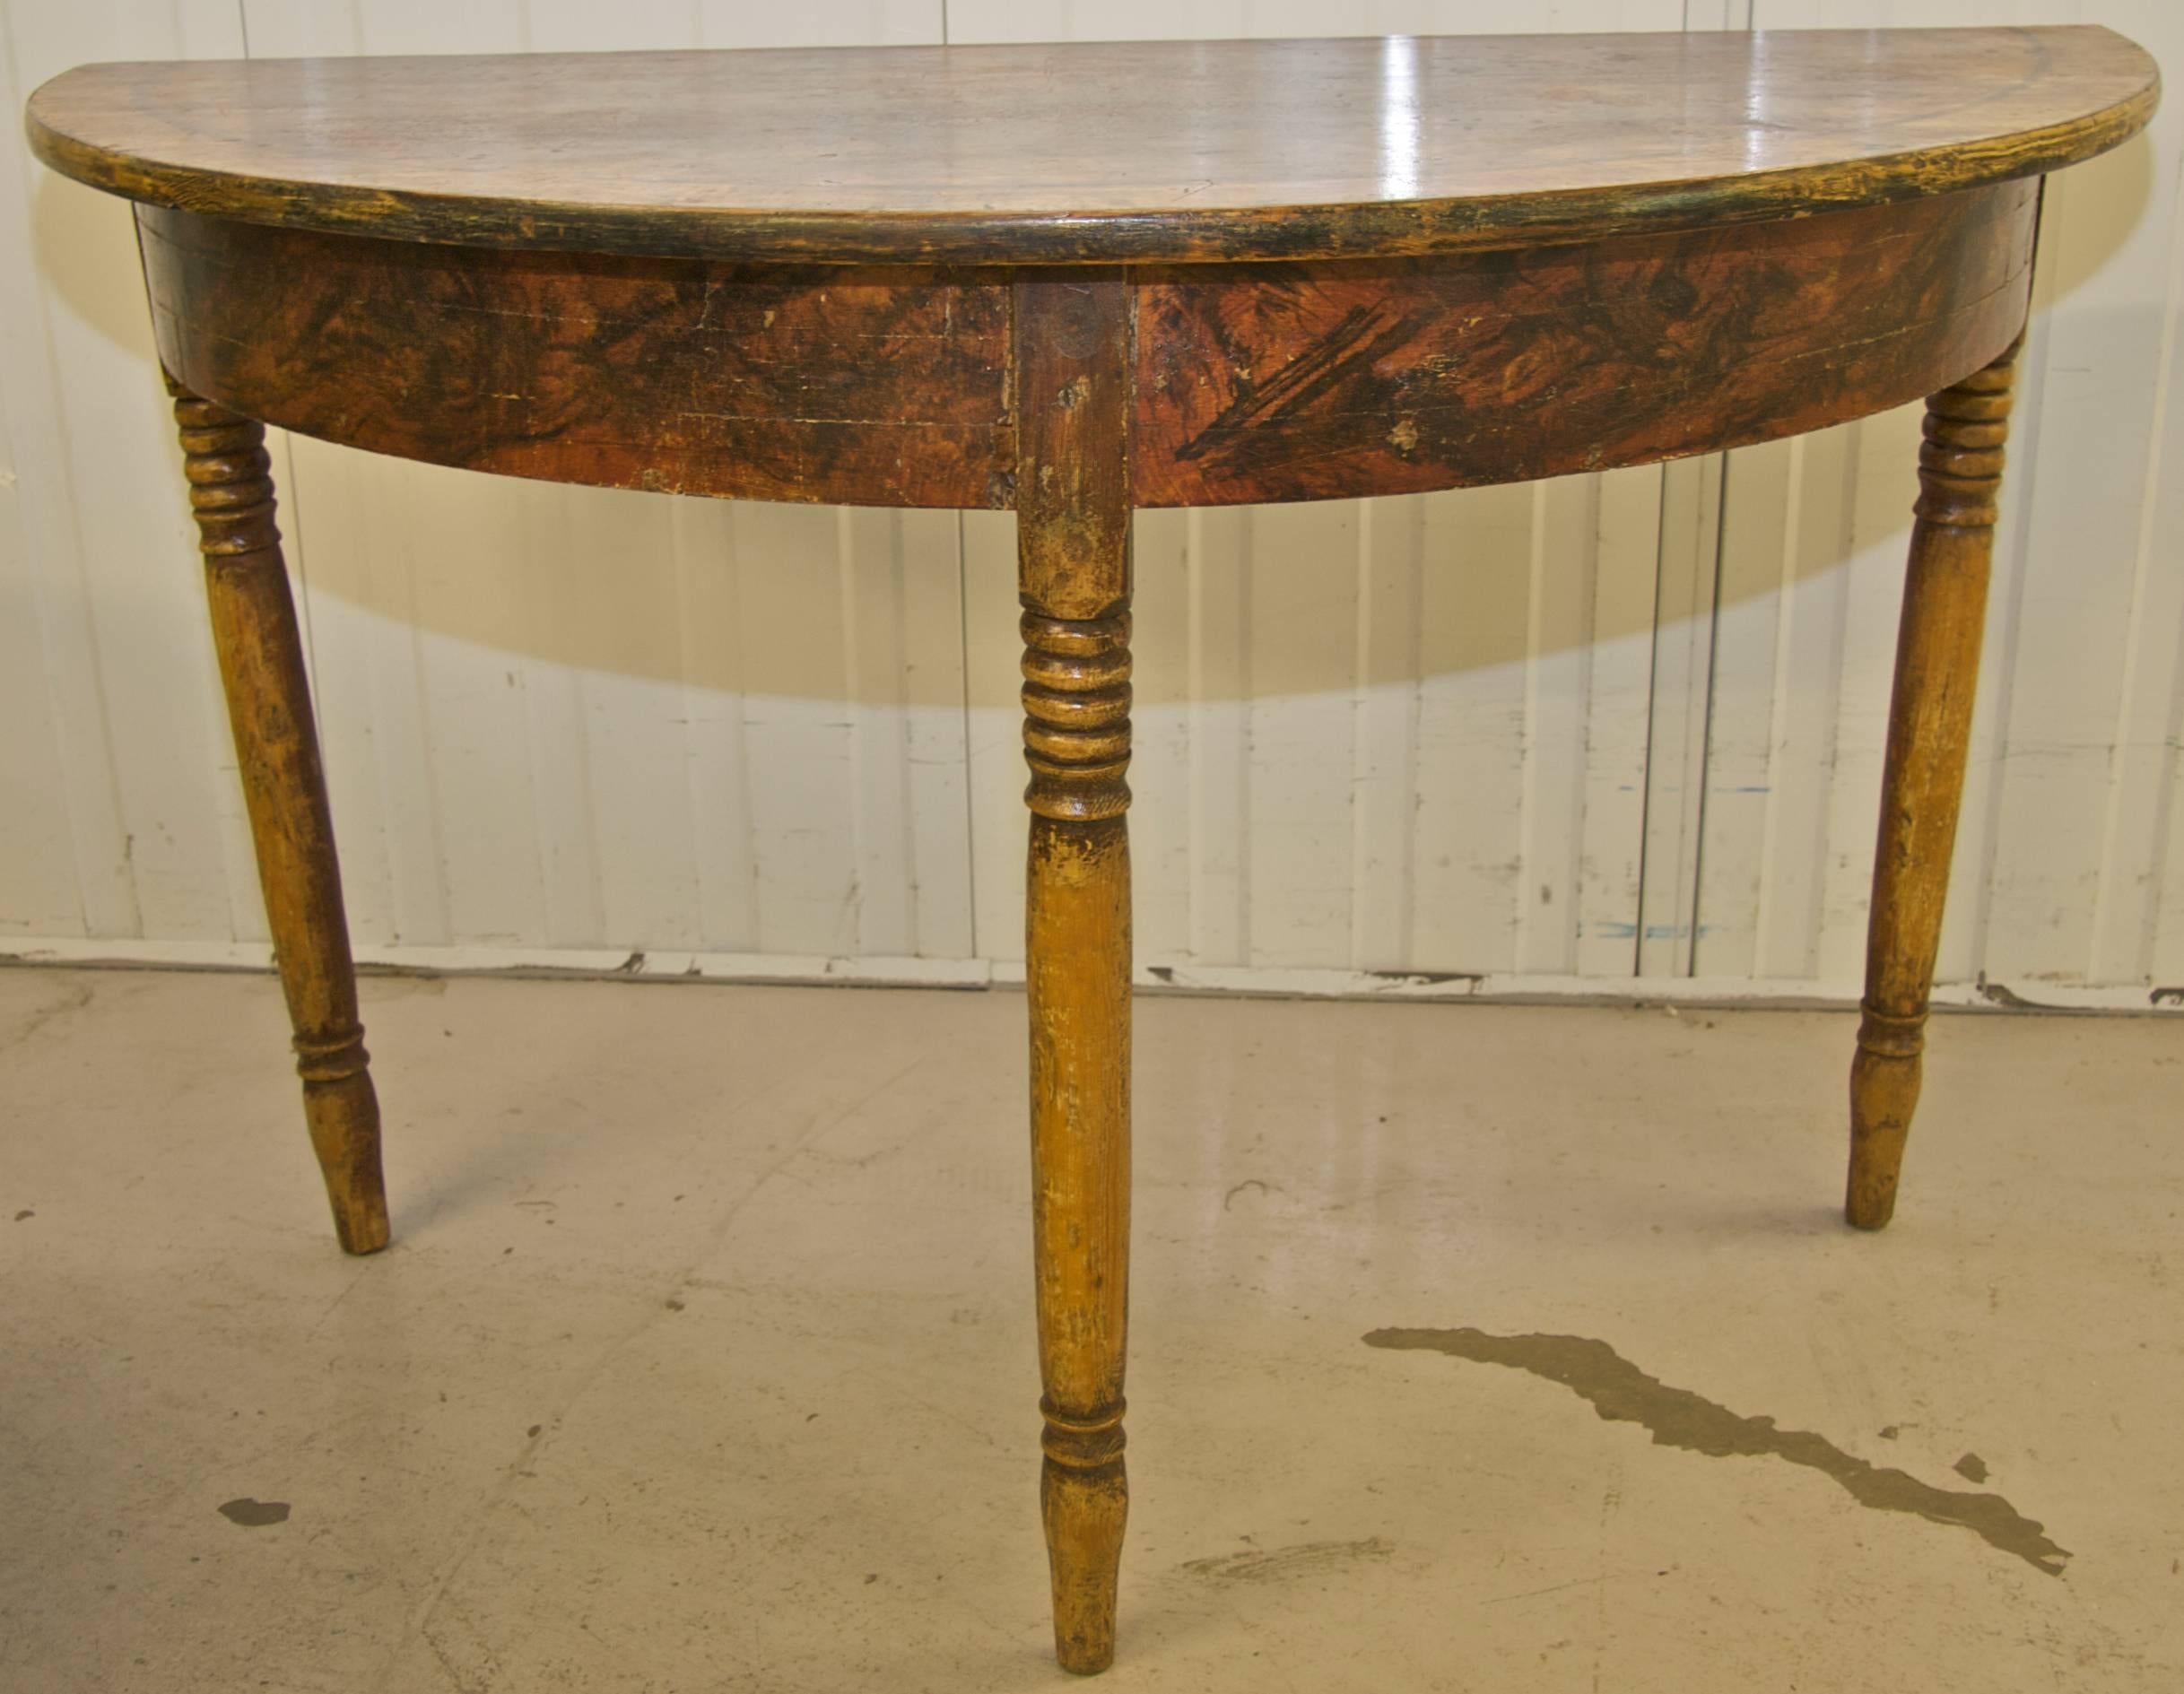 Rare pair of North Swedish Gustavian demilune tables hand decorated in delicious faux wood grain in the Classic Kurbits Folk Art tradition.

Lovely slender Gustavian Style legs.

The tables have acquired a lovely patina of age and are